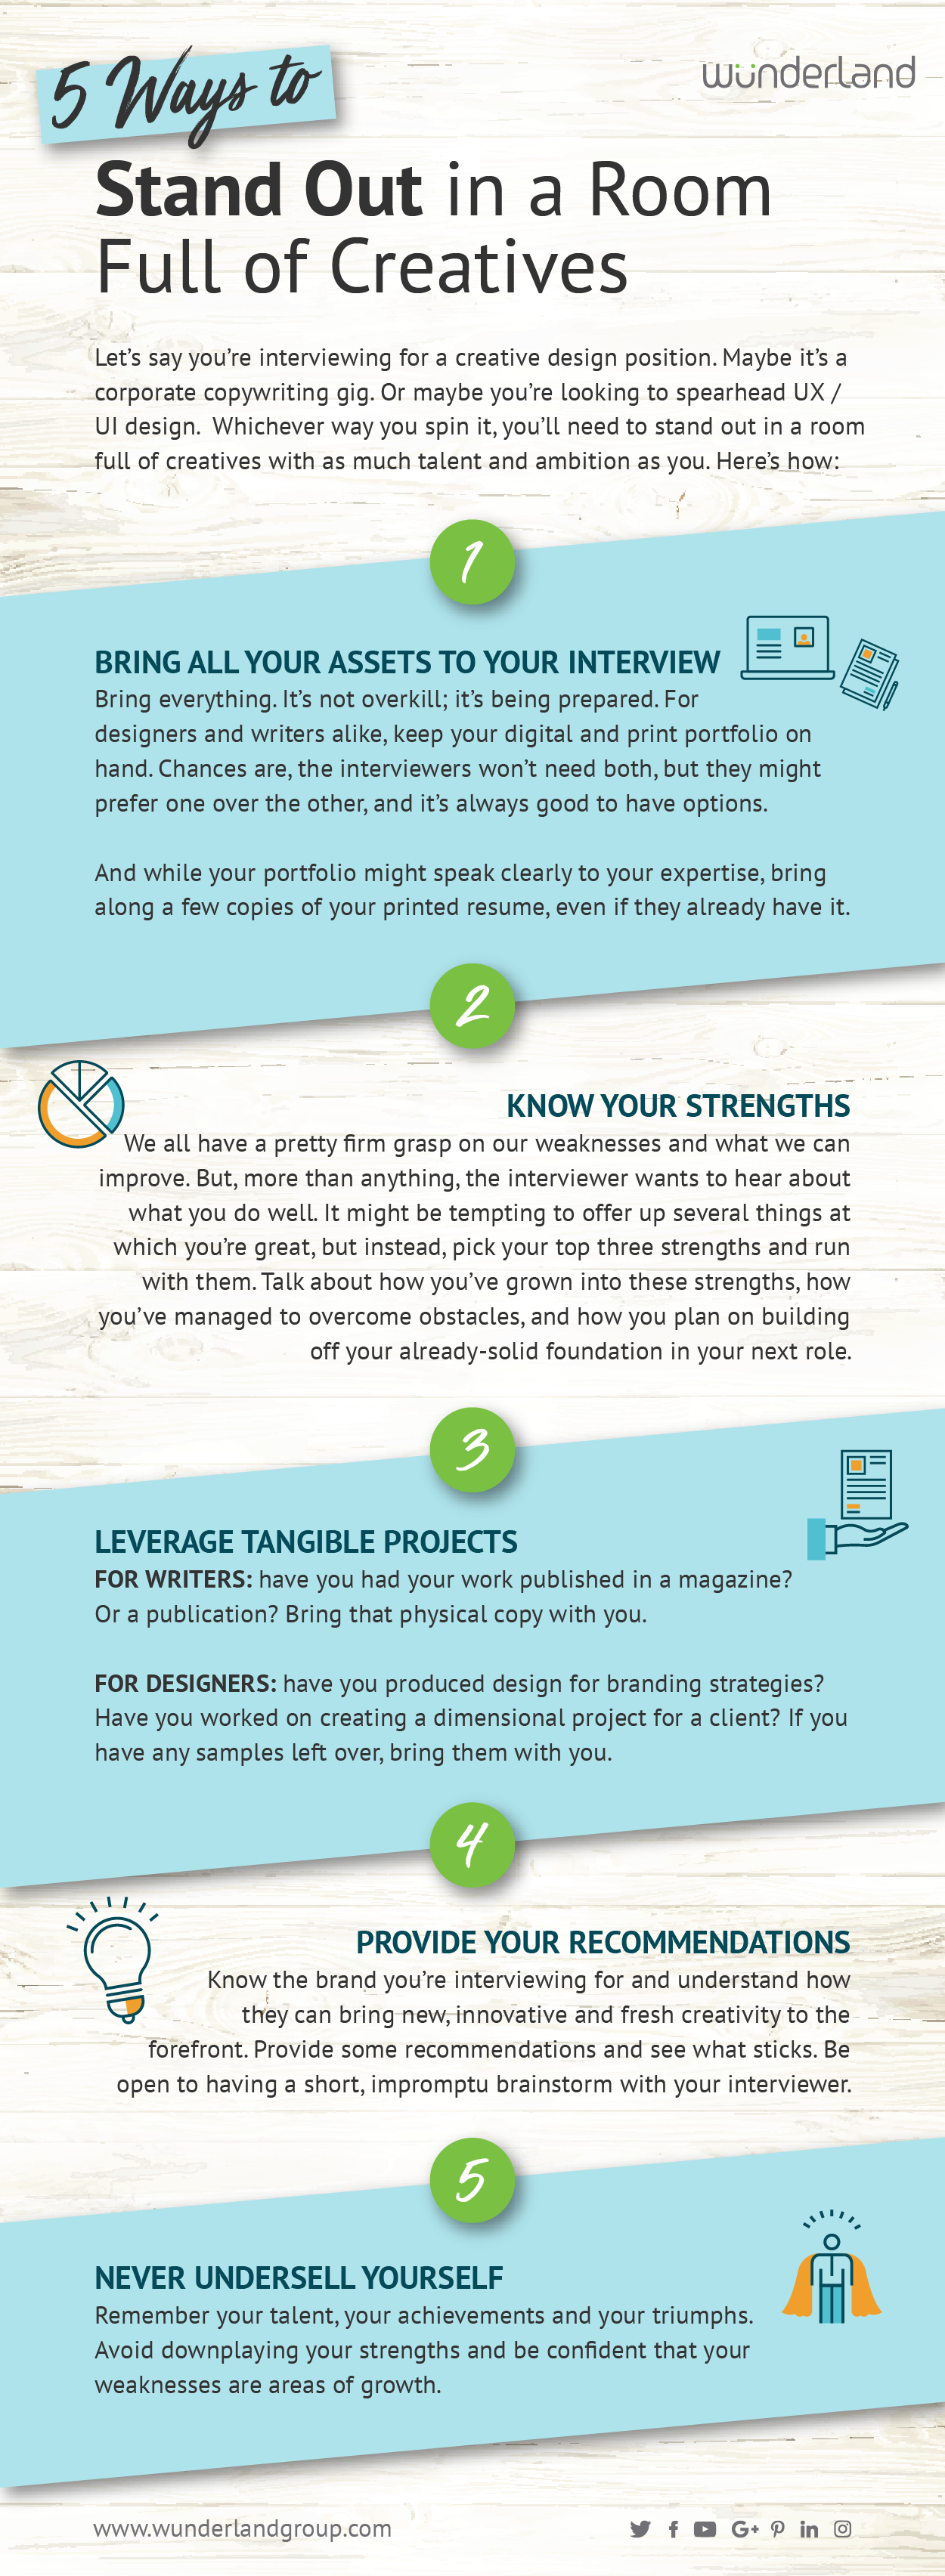 WLG - 5 Ways to Stand Out Blog - 2-20-19_WLG - 5 Ways to Stand Out Blog Image - 2-20-19